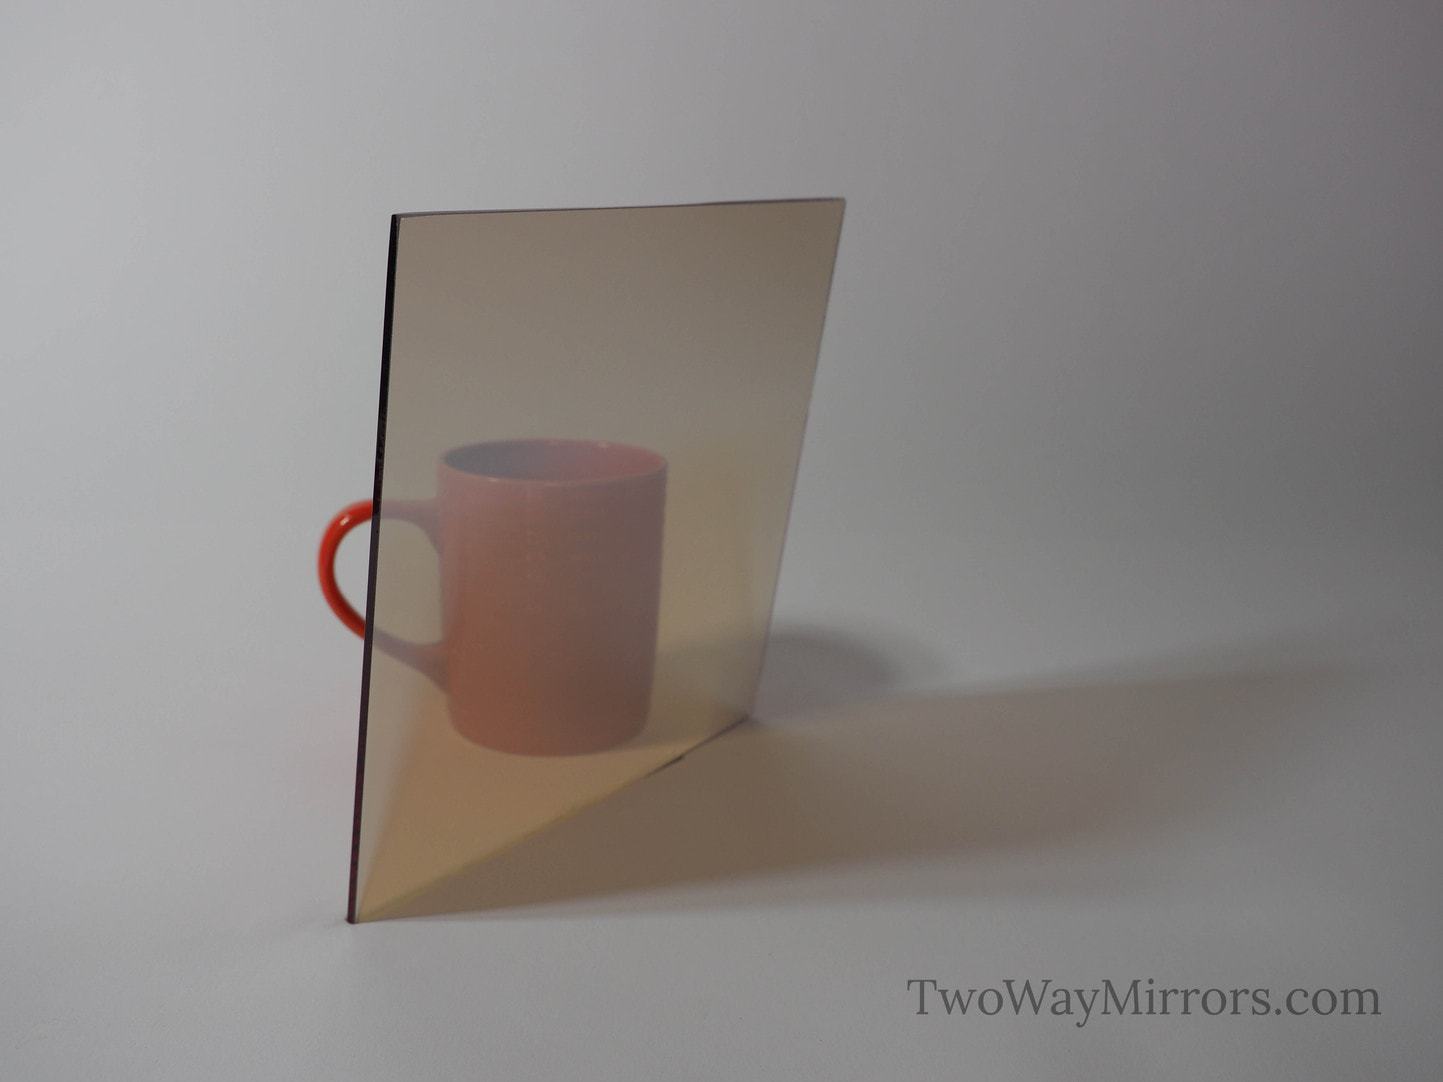 This is an easy way to test #travel #staysafe #twowaymirror #traveltik, how to know if a mirror is double sided